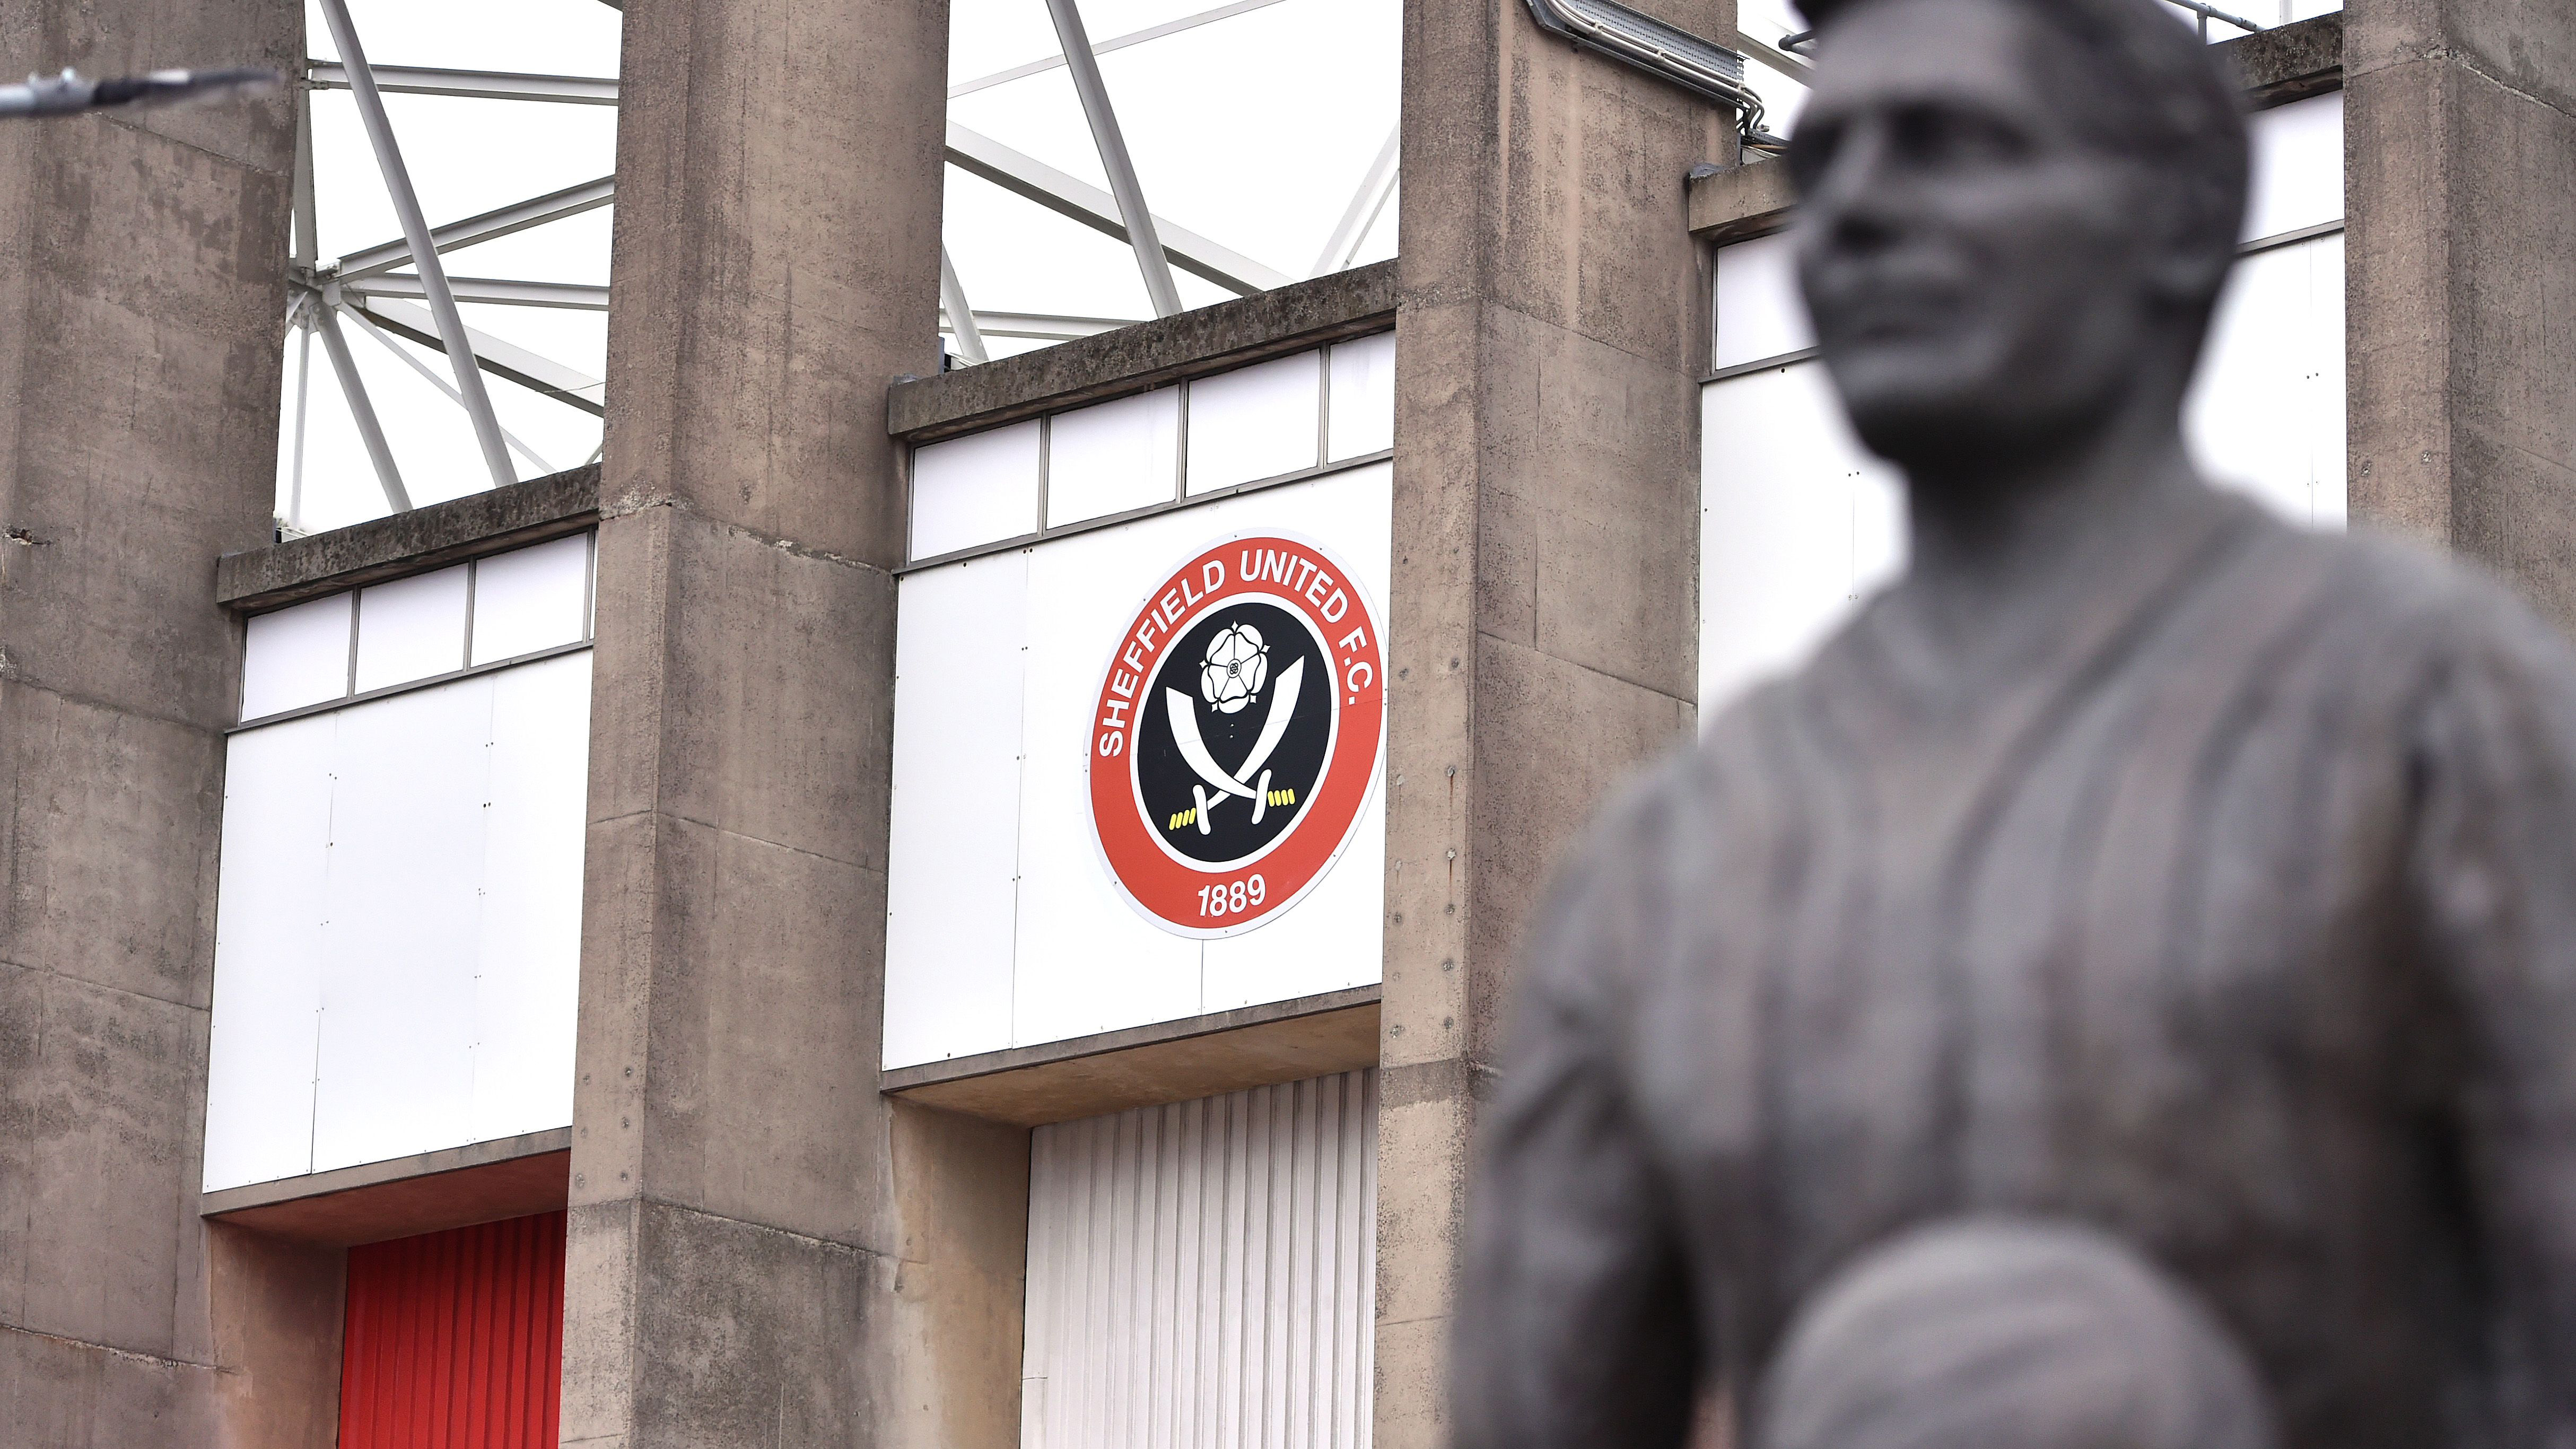 External Sheffield United badge and statue